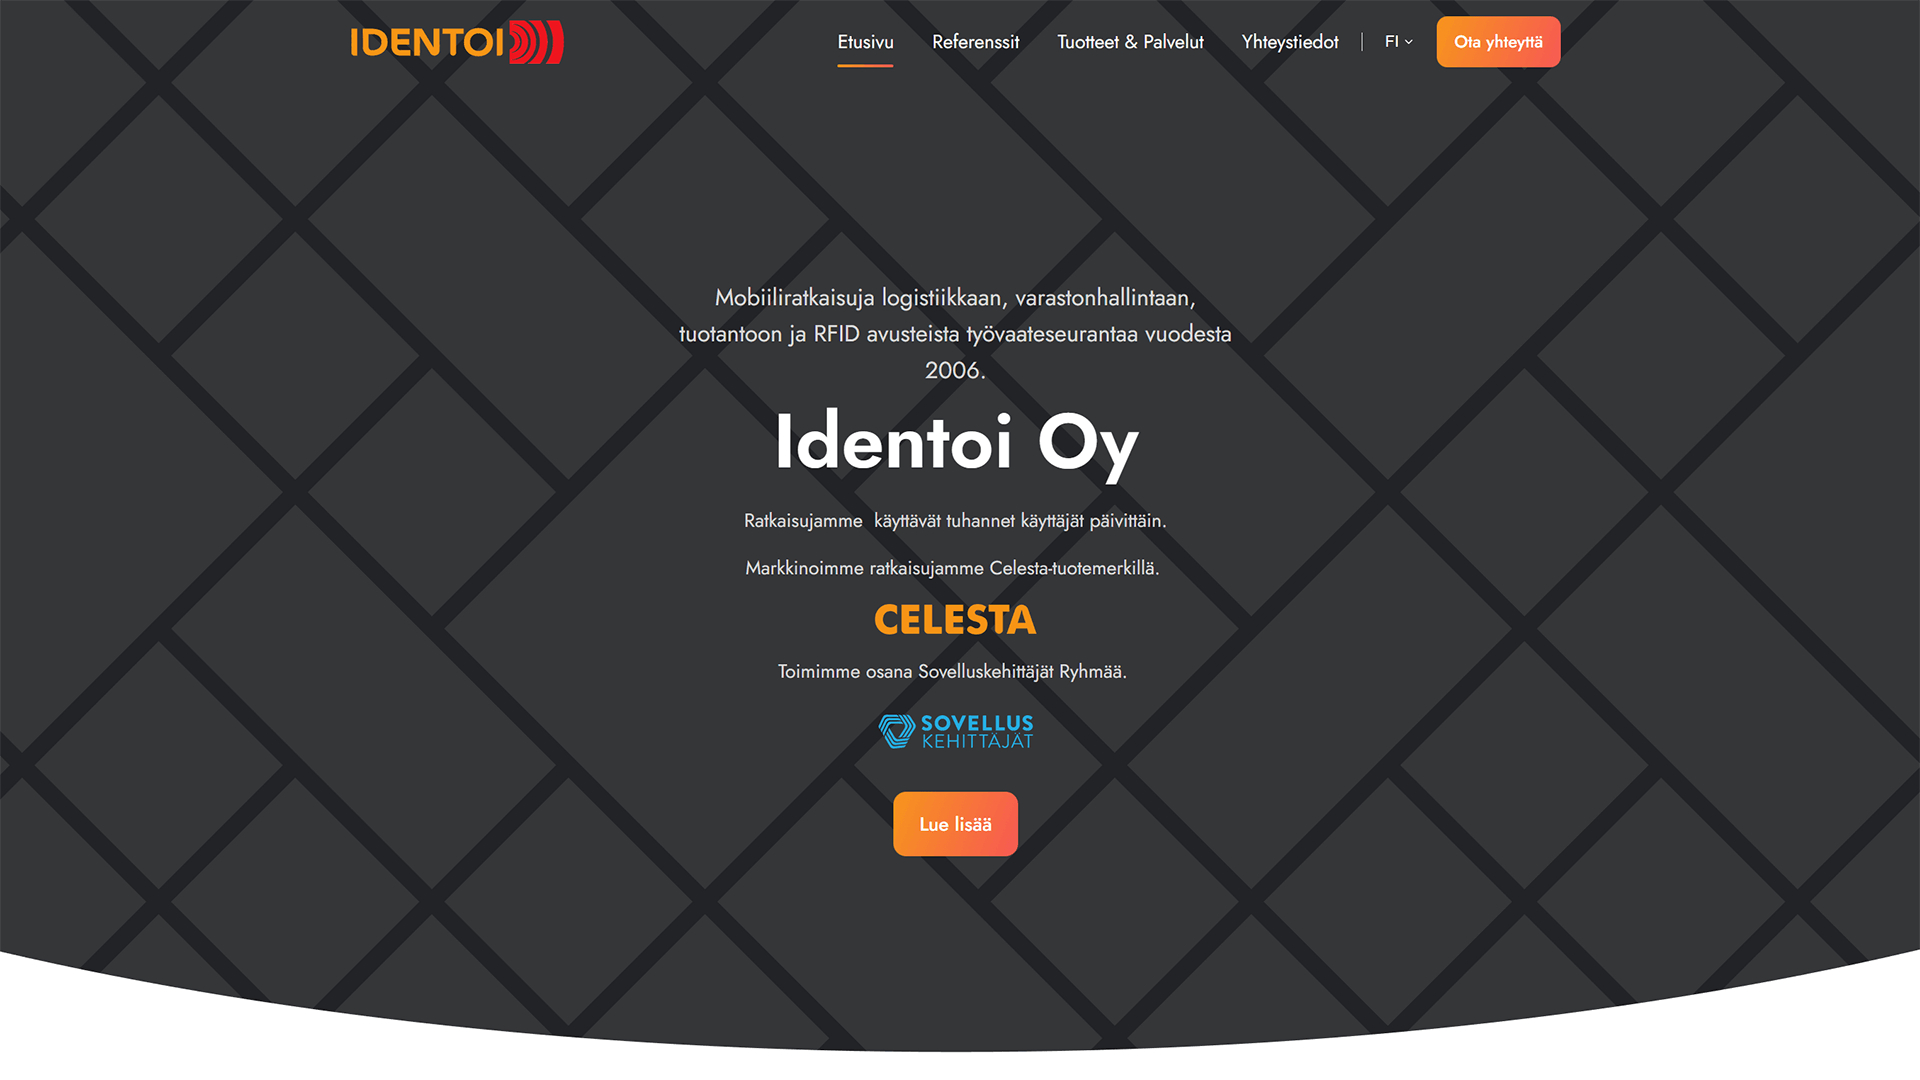 The beautiful identoi.com website created with Act3 on the HubSpot CMS